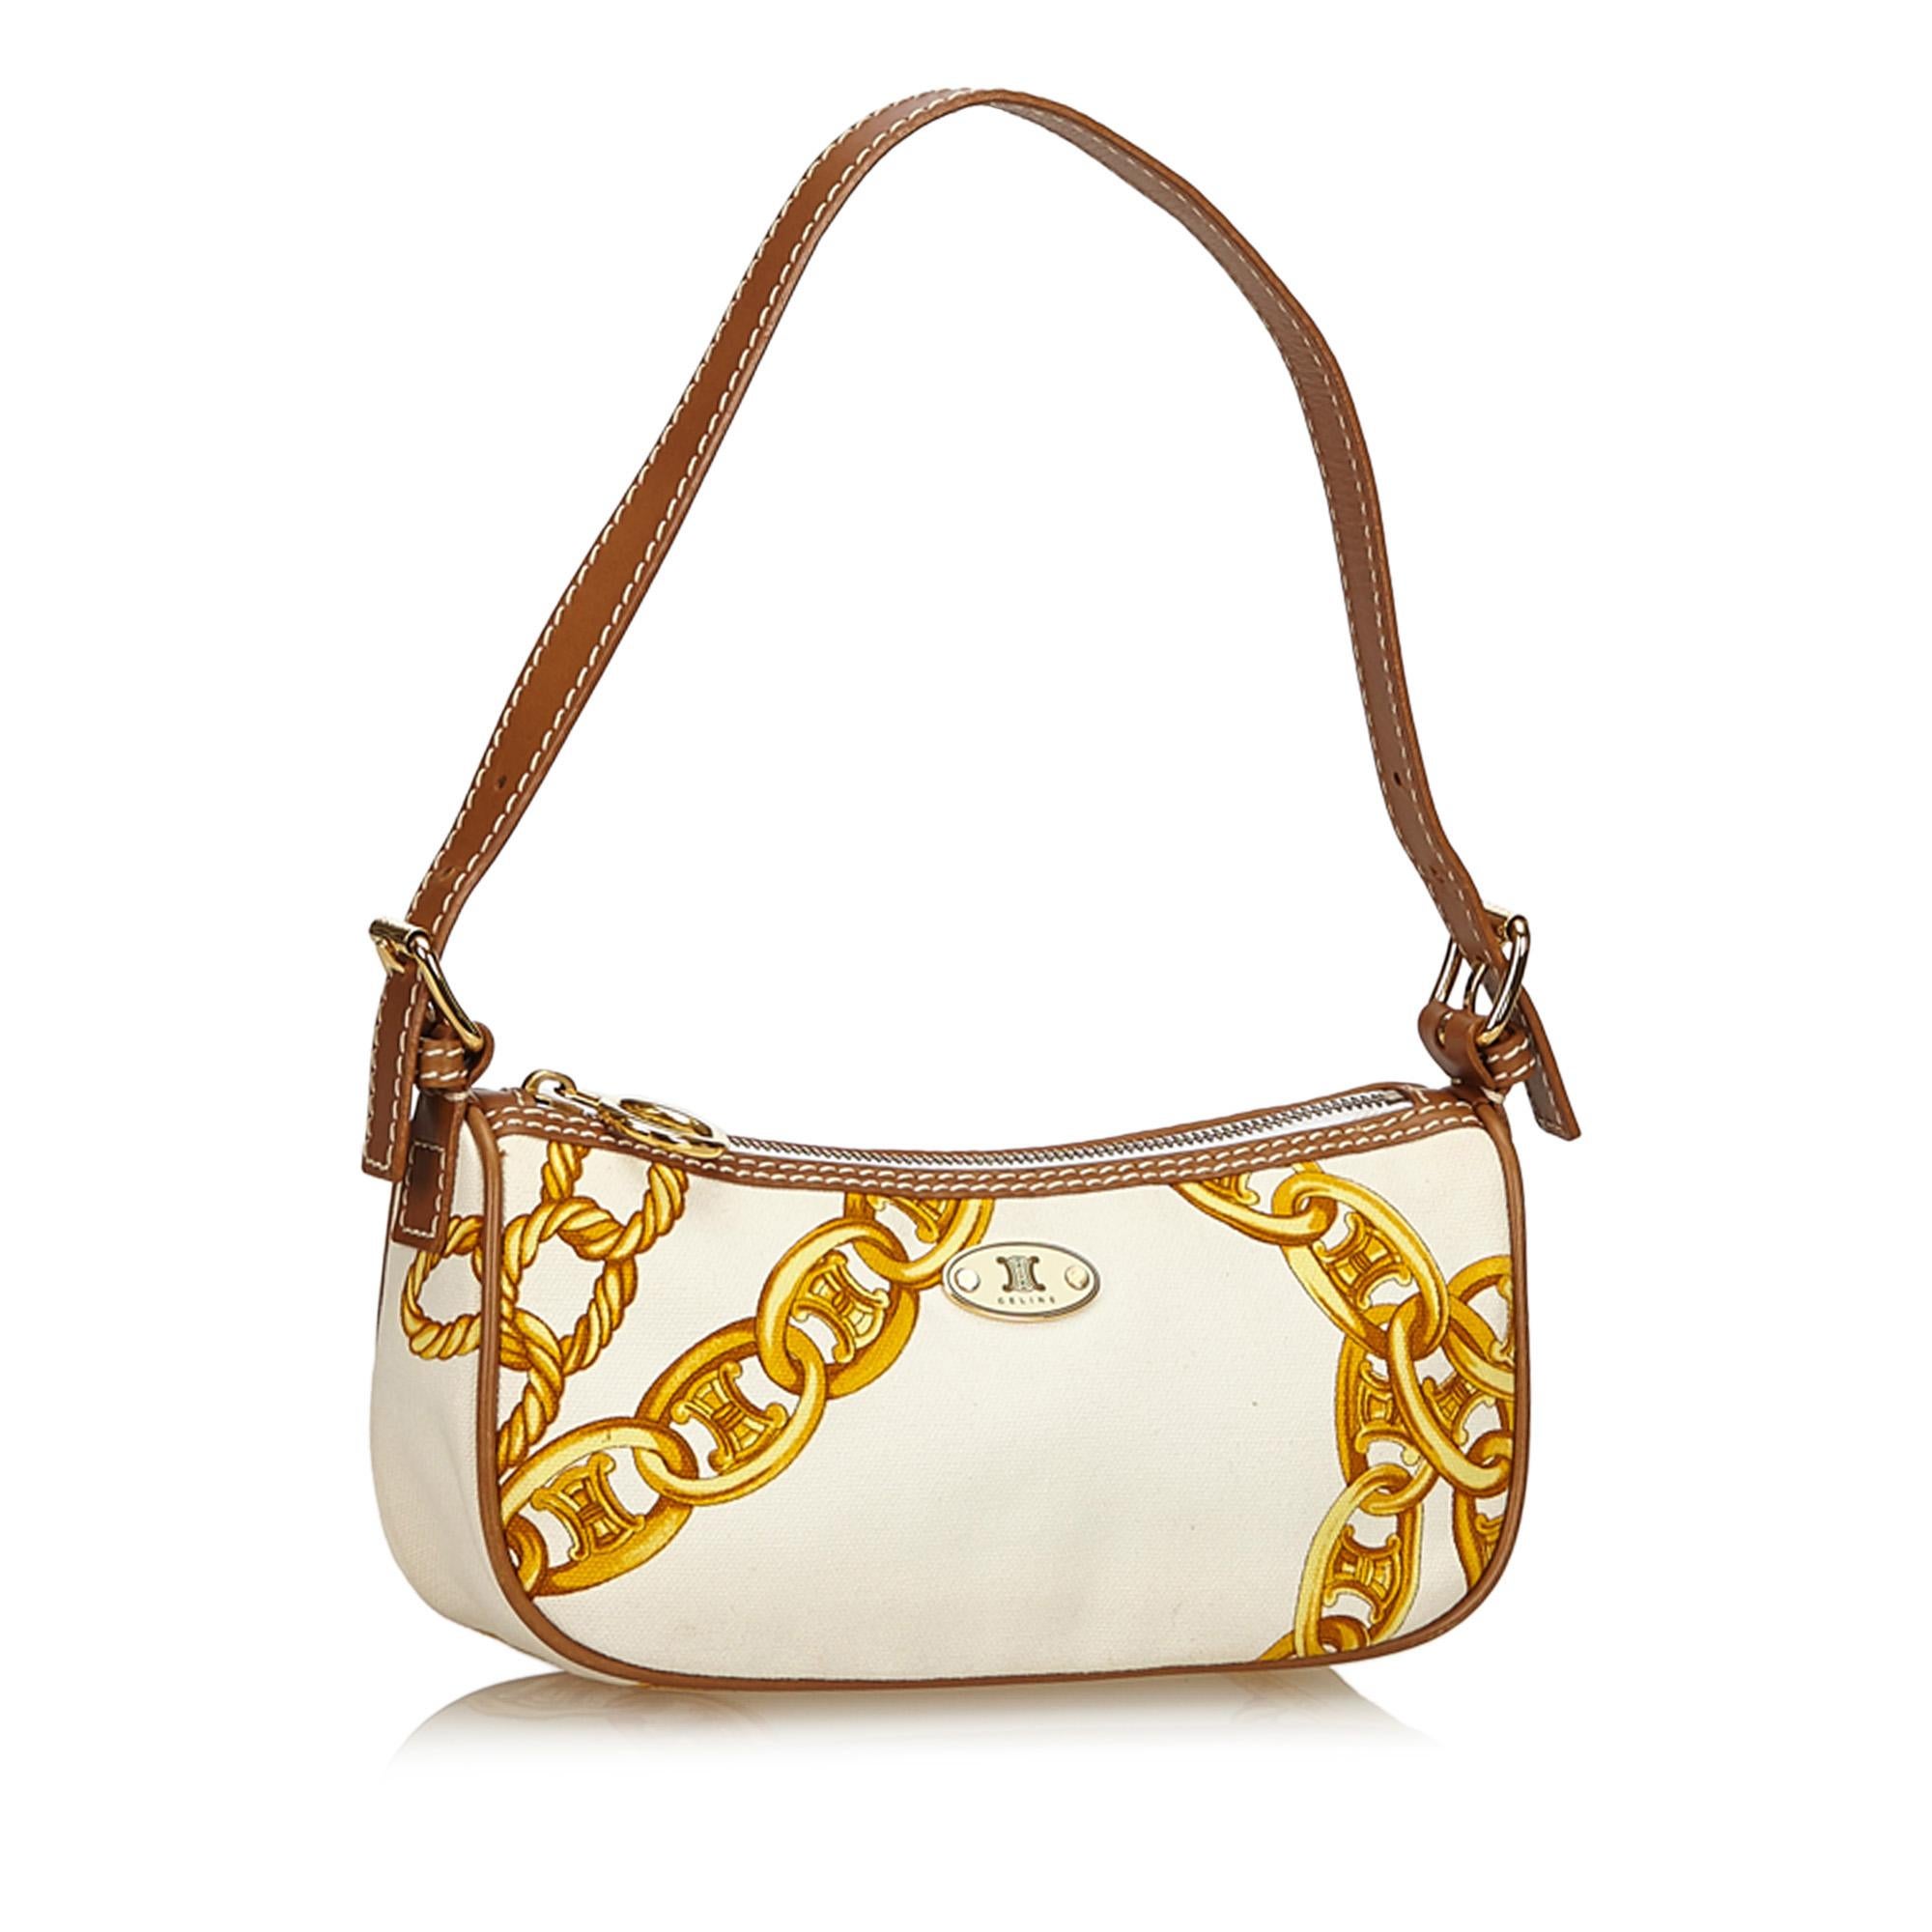 This baguette features a canvas body with leather trim and gold chain print, flat leather strap, top zip closure, and interior slip pocket. It carries as B+ condition rating.

Inclusions: 
This item does not come with